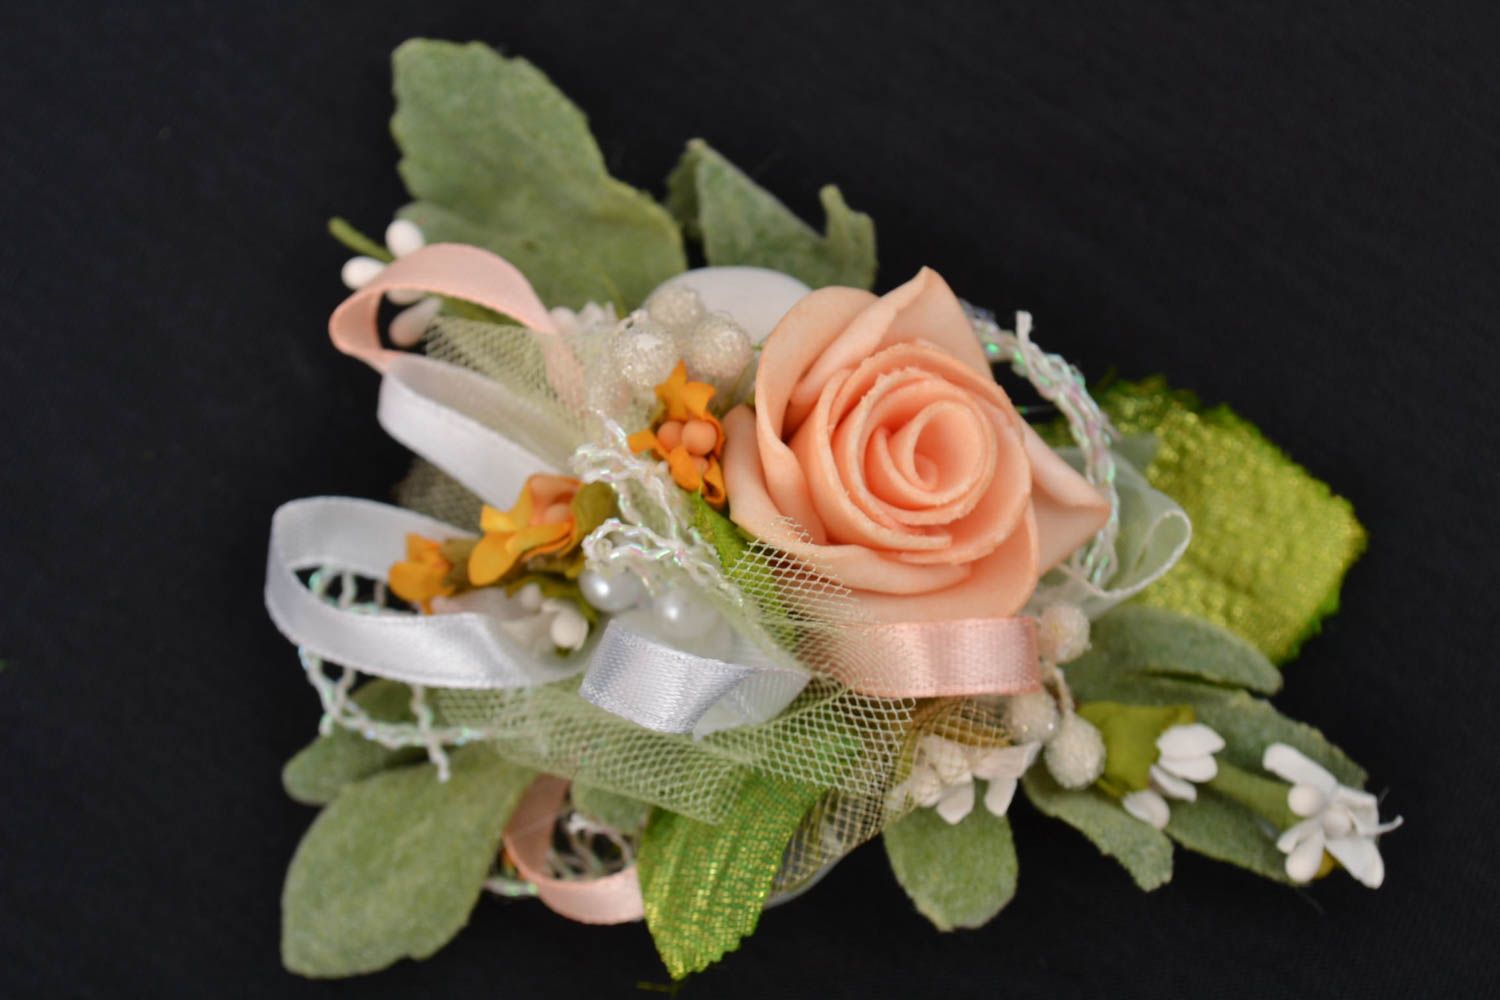 Artificial beautiful flower for hair clip or another handmade accessory photo 3